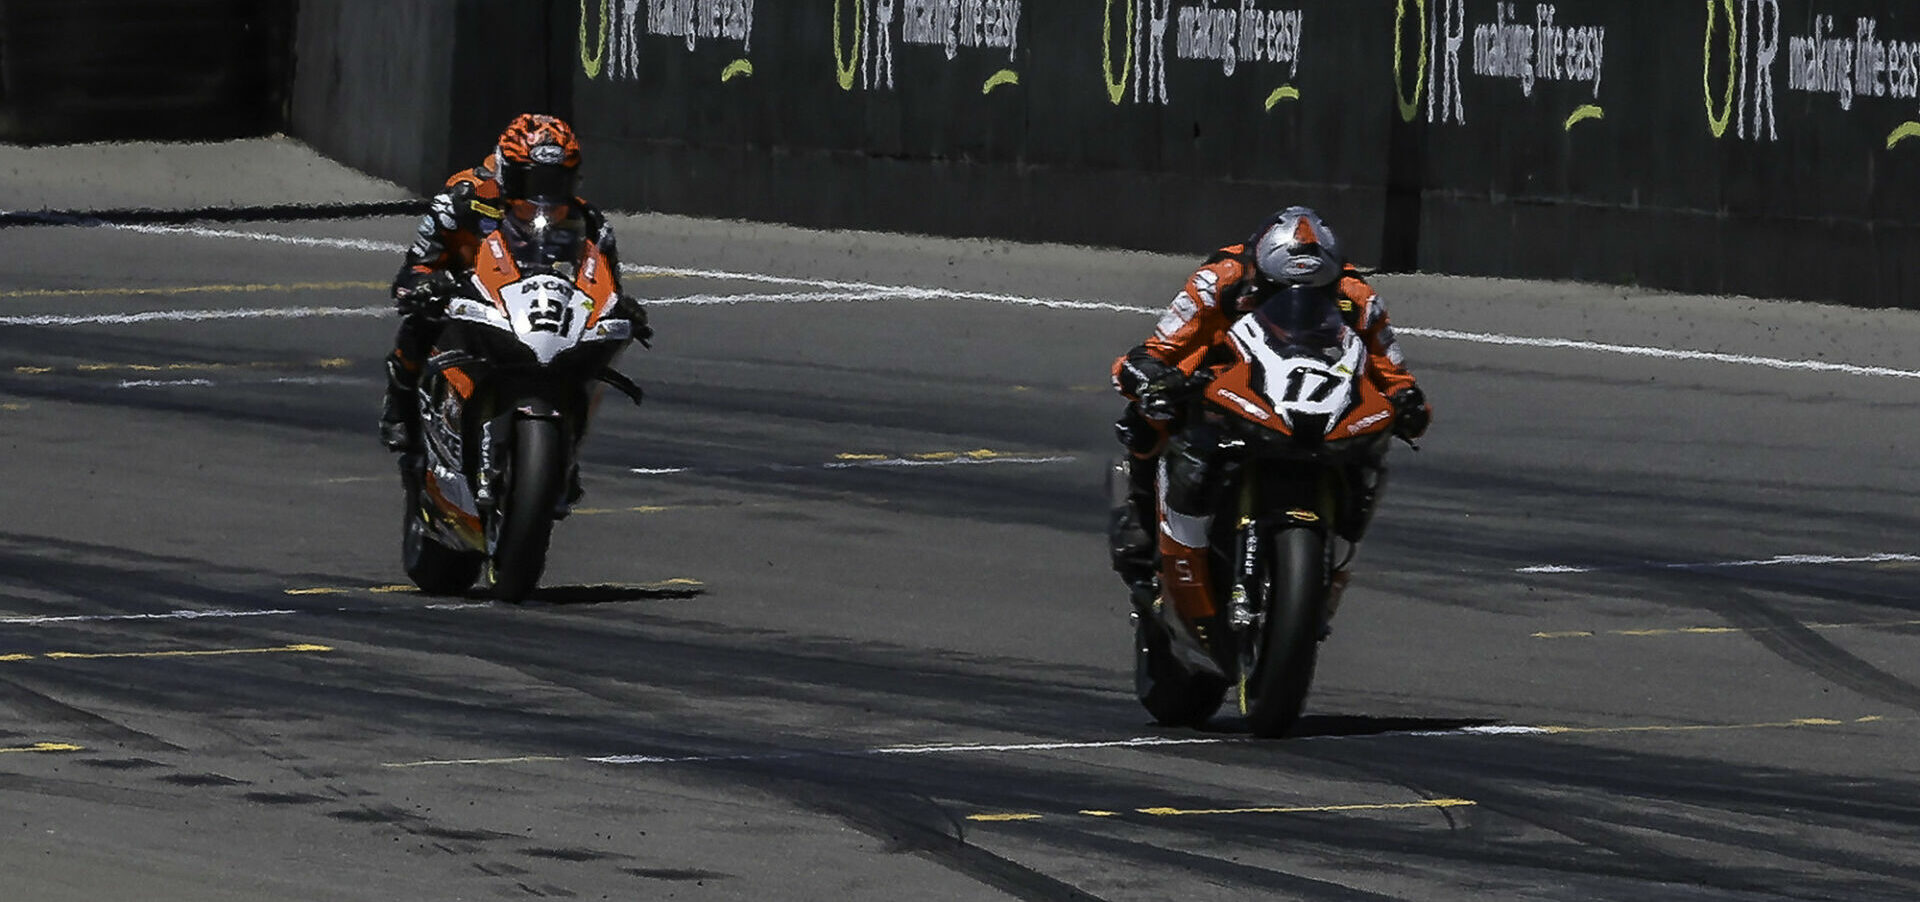 Troy Herfoss (17) leads Josh Waters (21) across the finish line at the end of Race One. Photo courtesy ASBK.